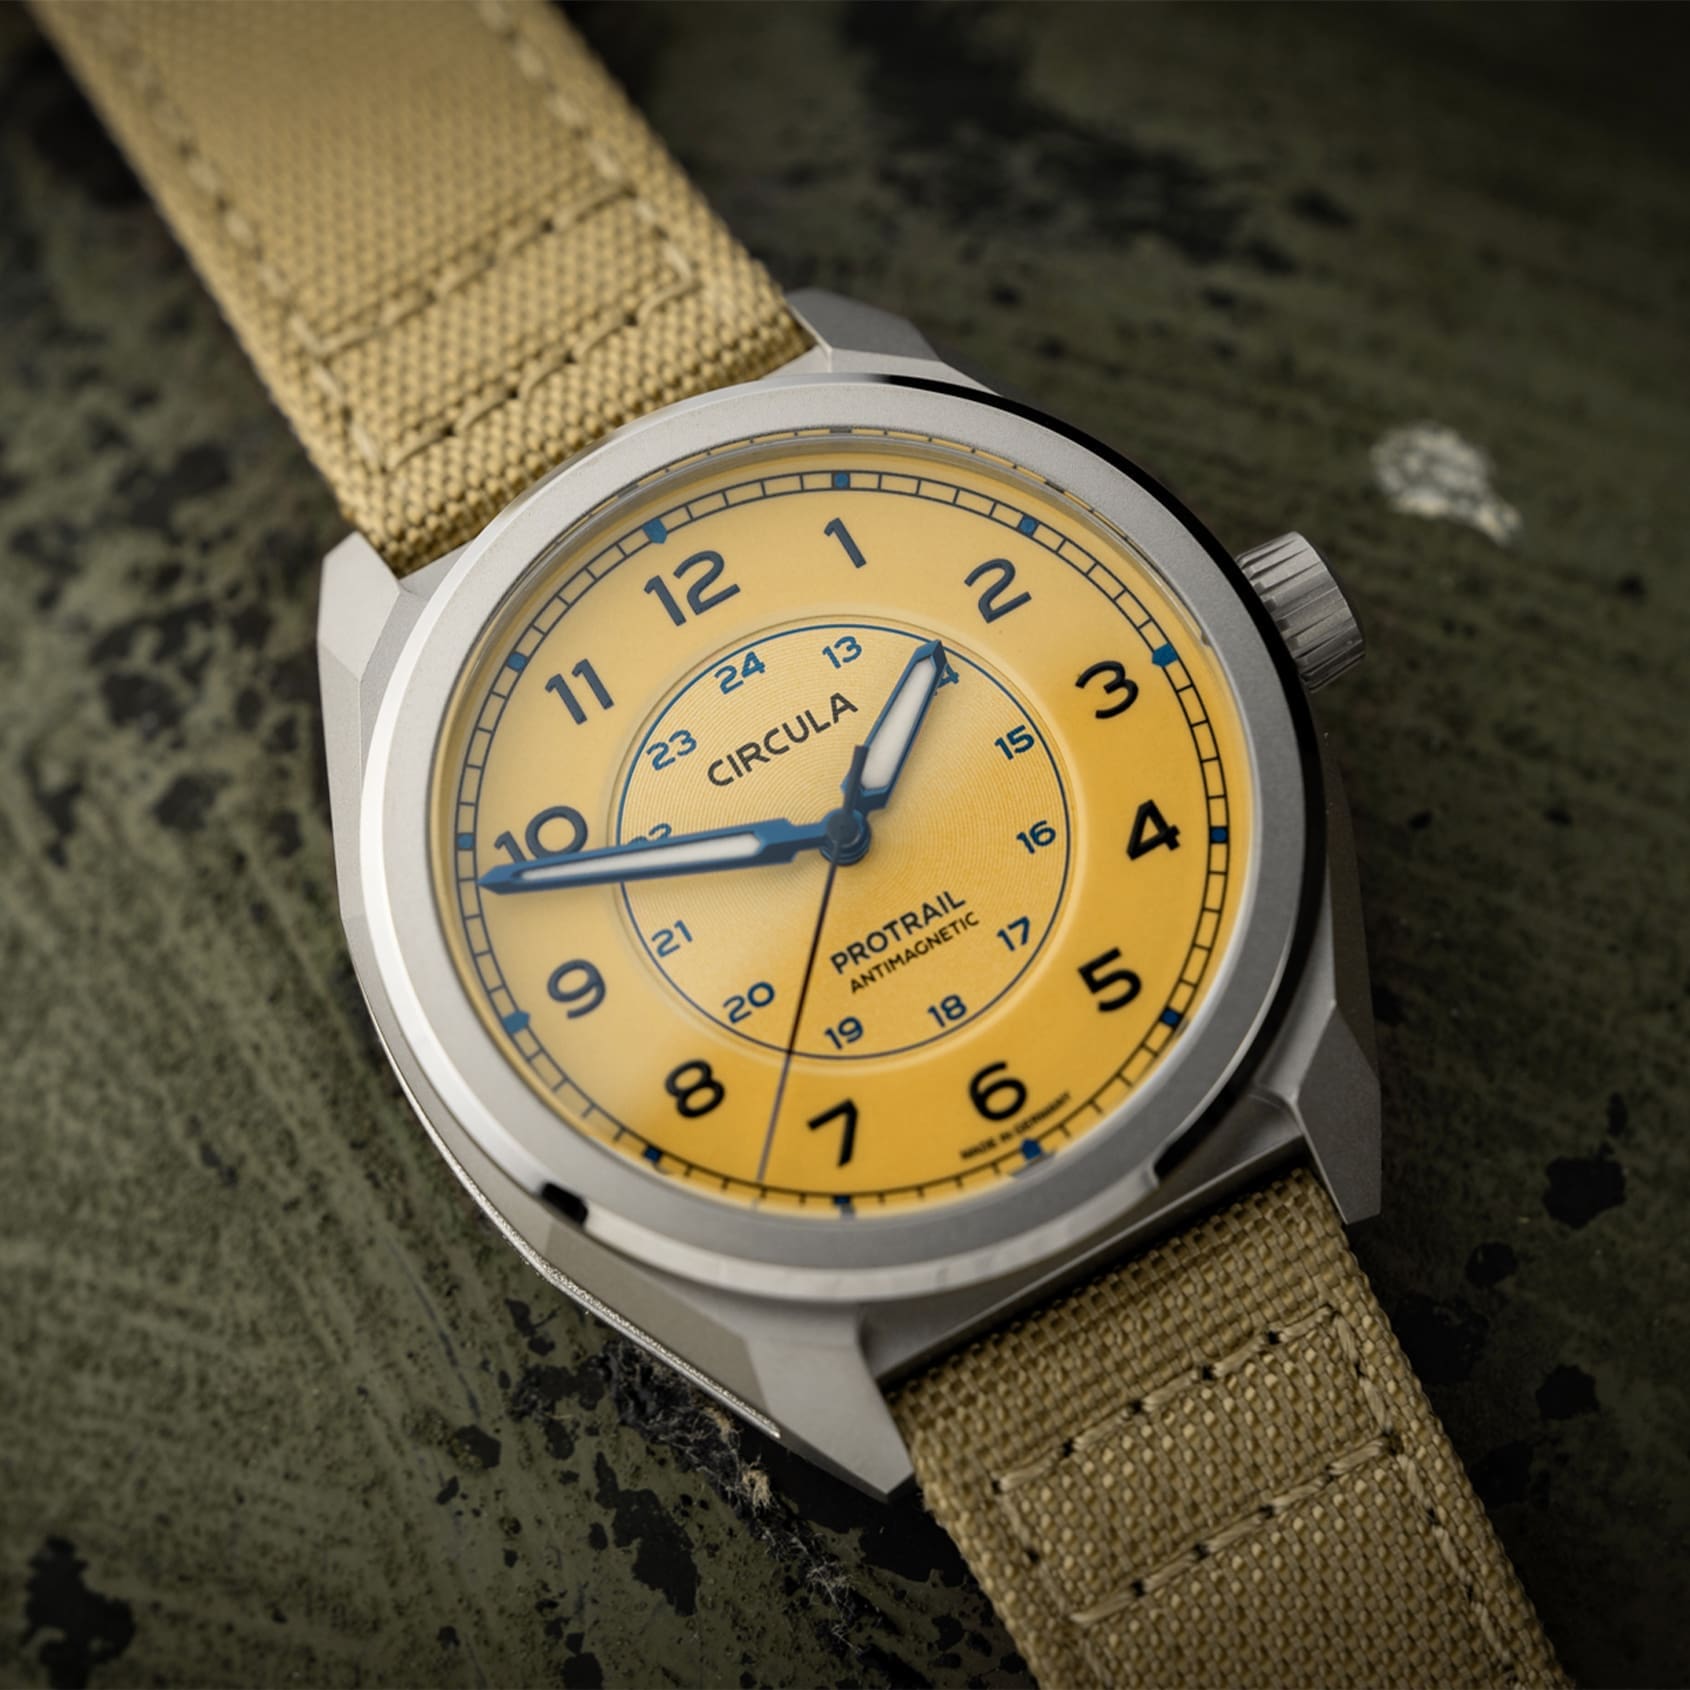 MICRO-MONDAYS: The Circula ProTrail is a high-tech field watch combining toughness and style